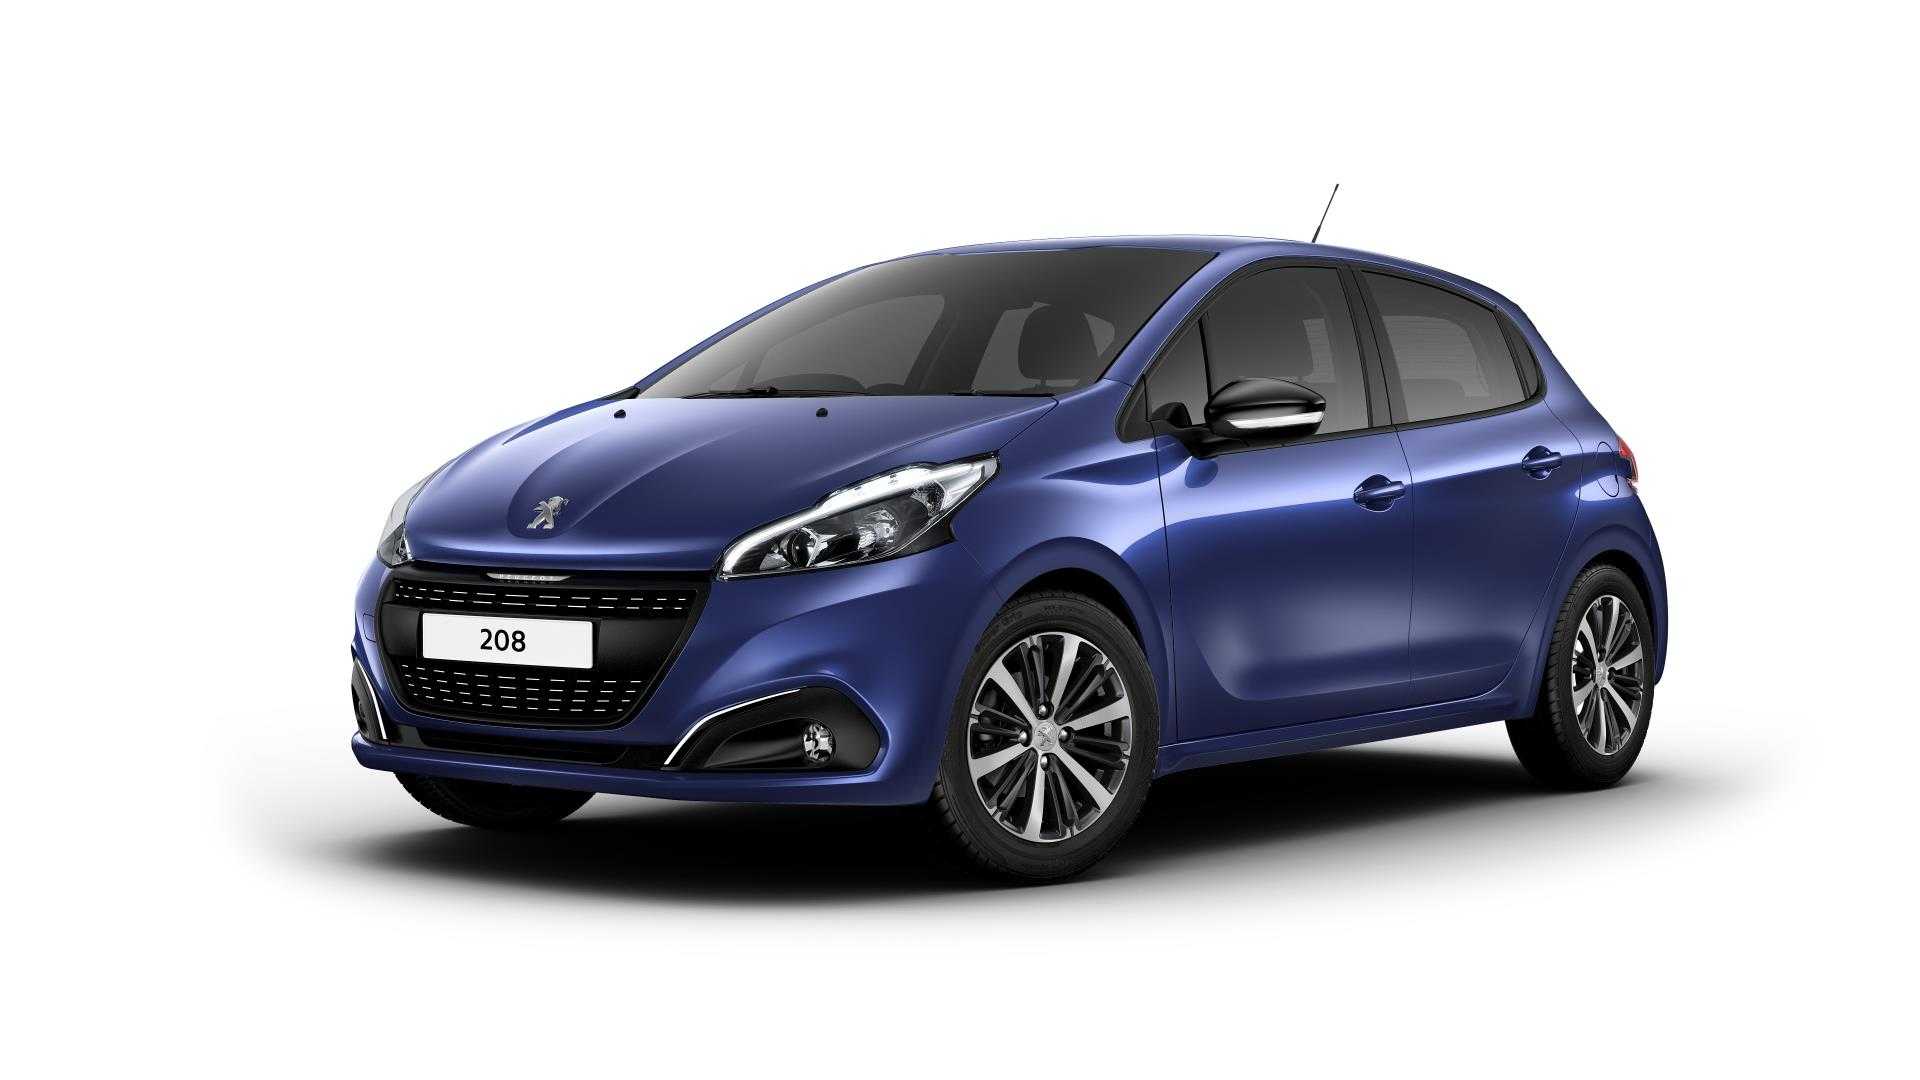 Electric Peugeot 208 Will Appear Mostly Unchanged From ICE 208